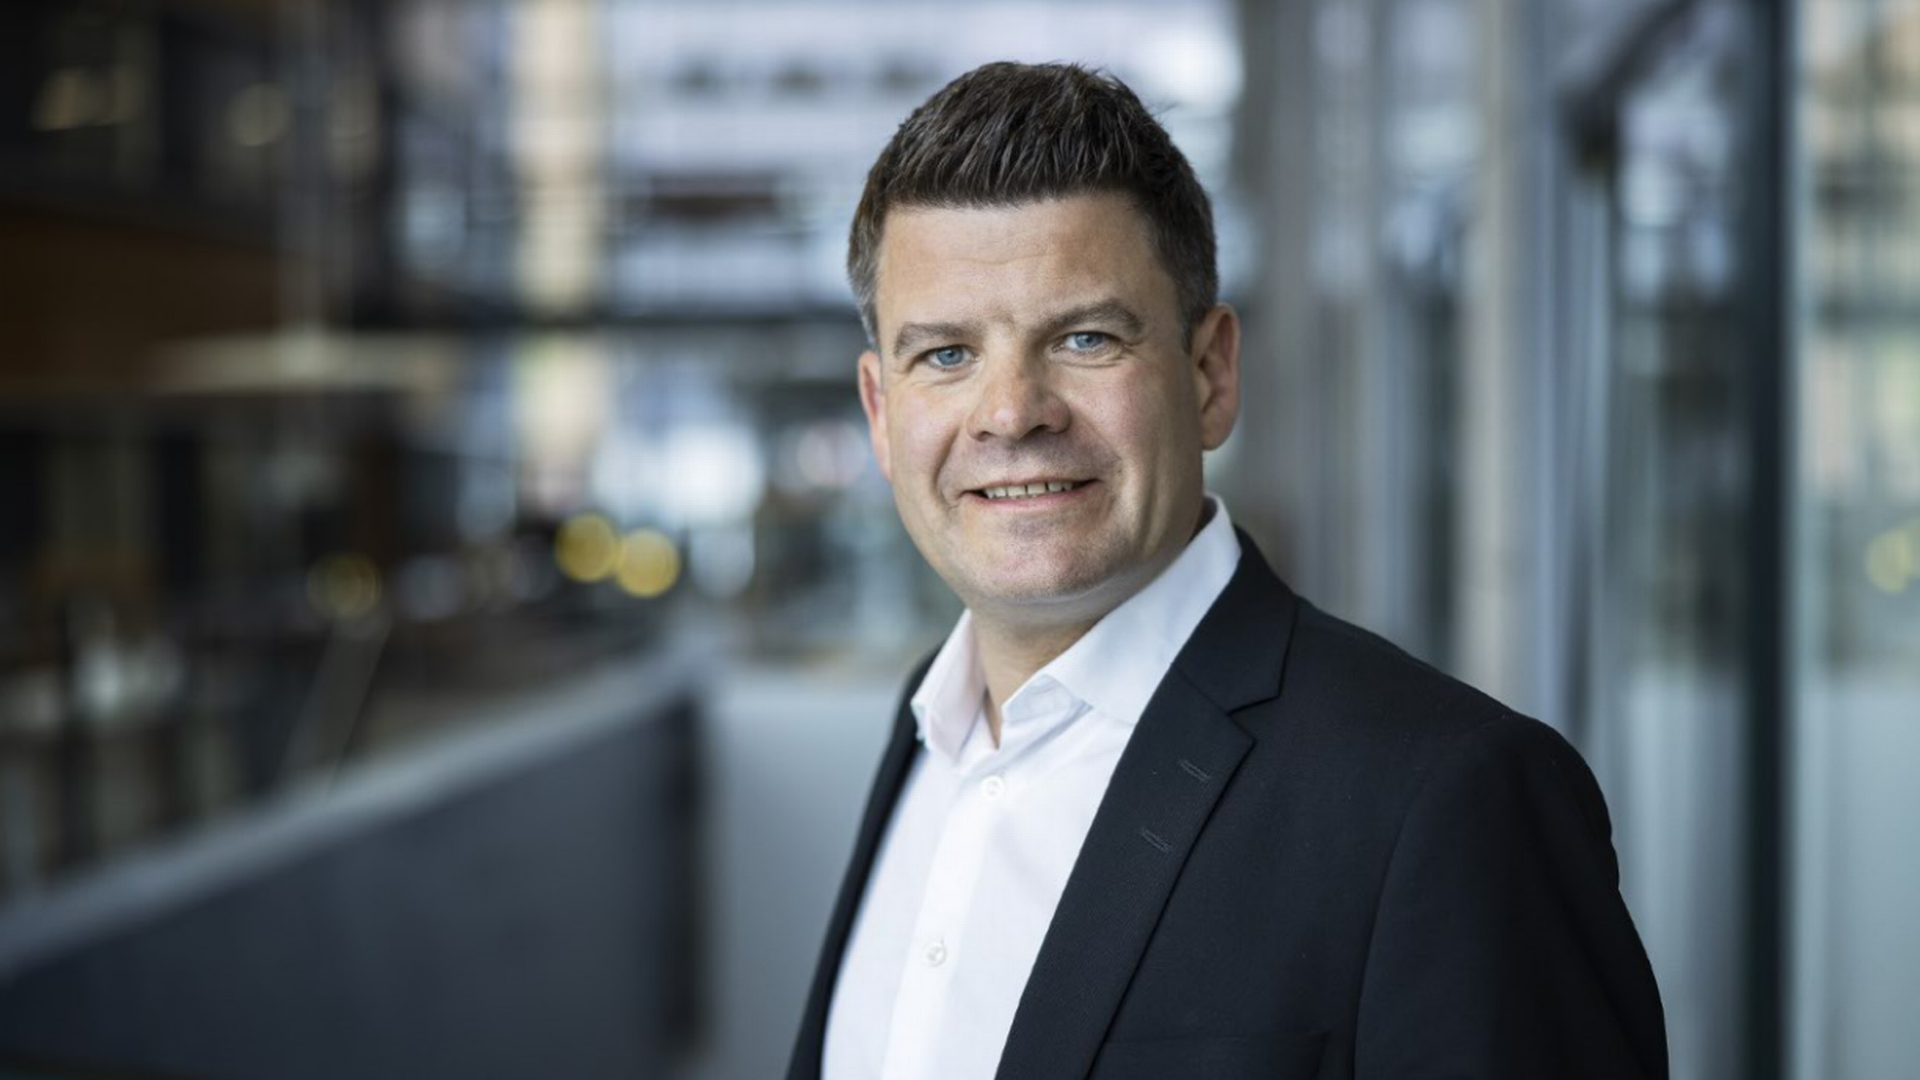 Lasse Kristoffersen, CEO of Wallenius Wilhelmsen, doubts that terminal operators will increase port capacity at the same rate as the many new ships are delivered. | Photo: Wallenius Wilhelmsen